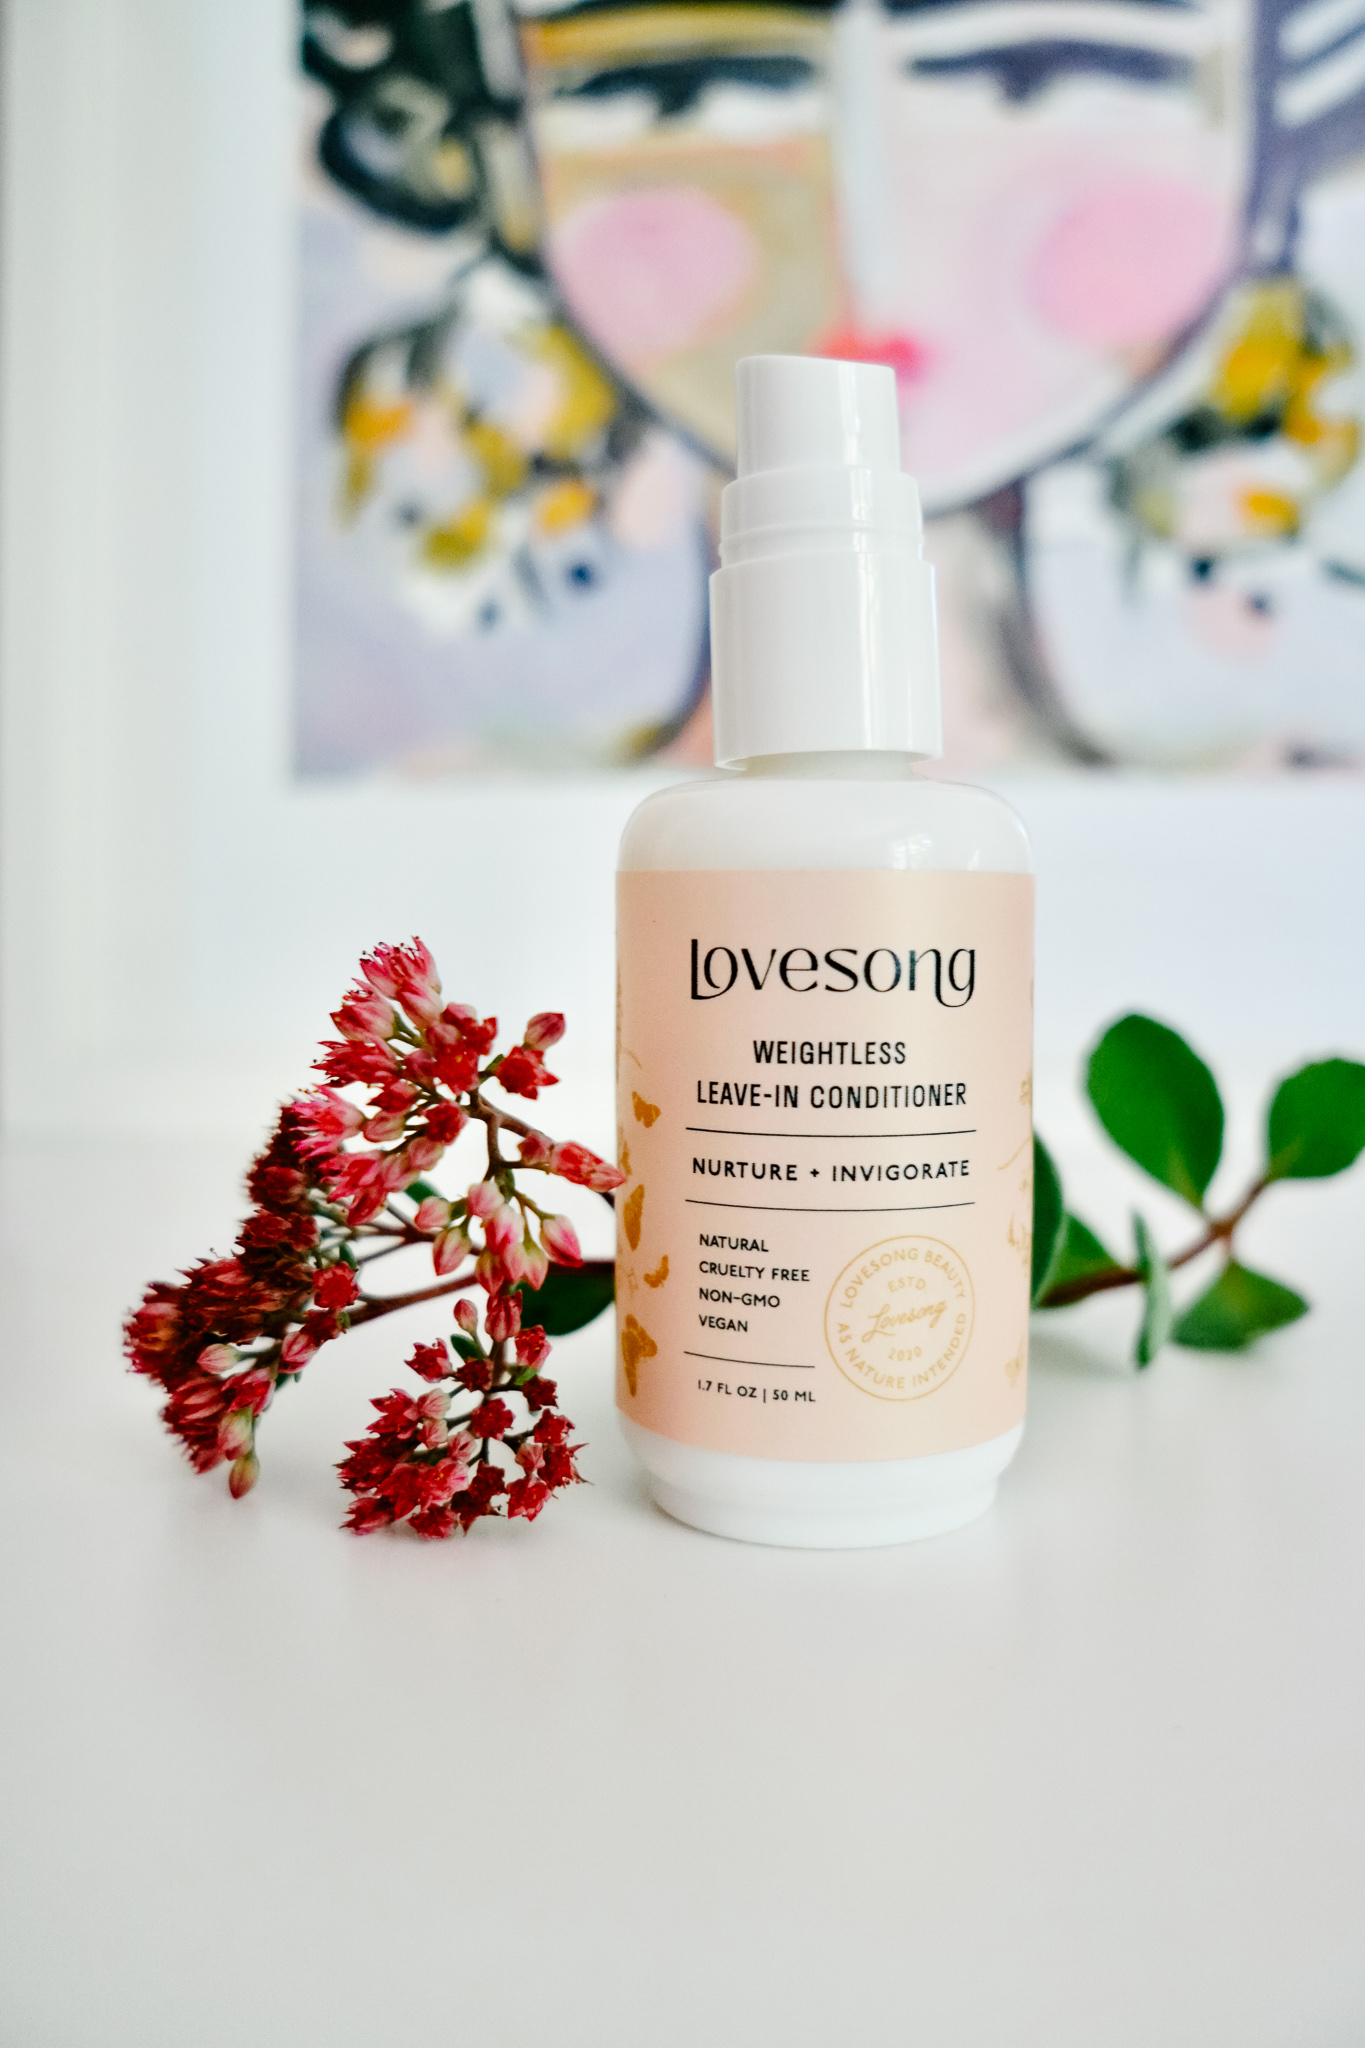 Lovesong Beauty Review: Weightless Leave-In Conditioner